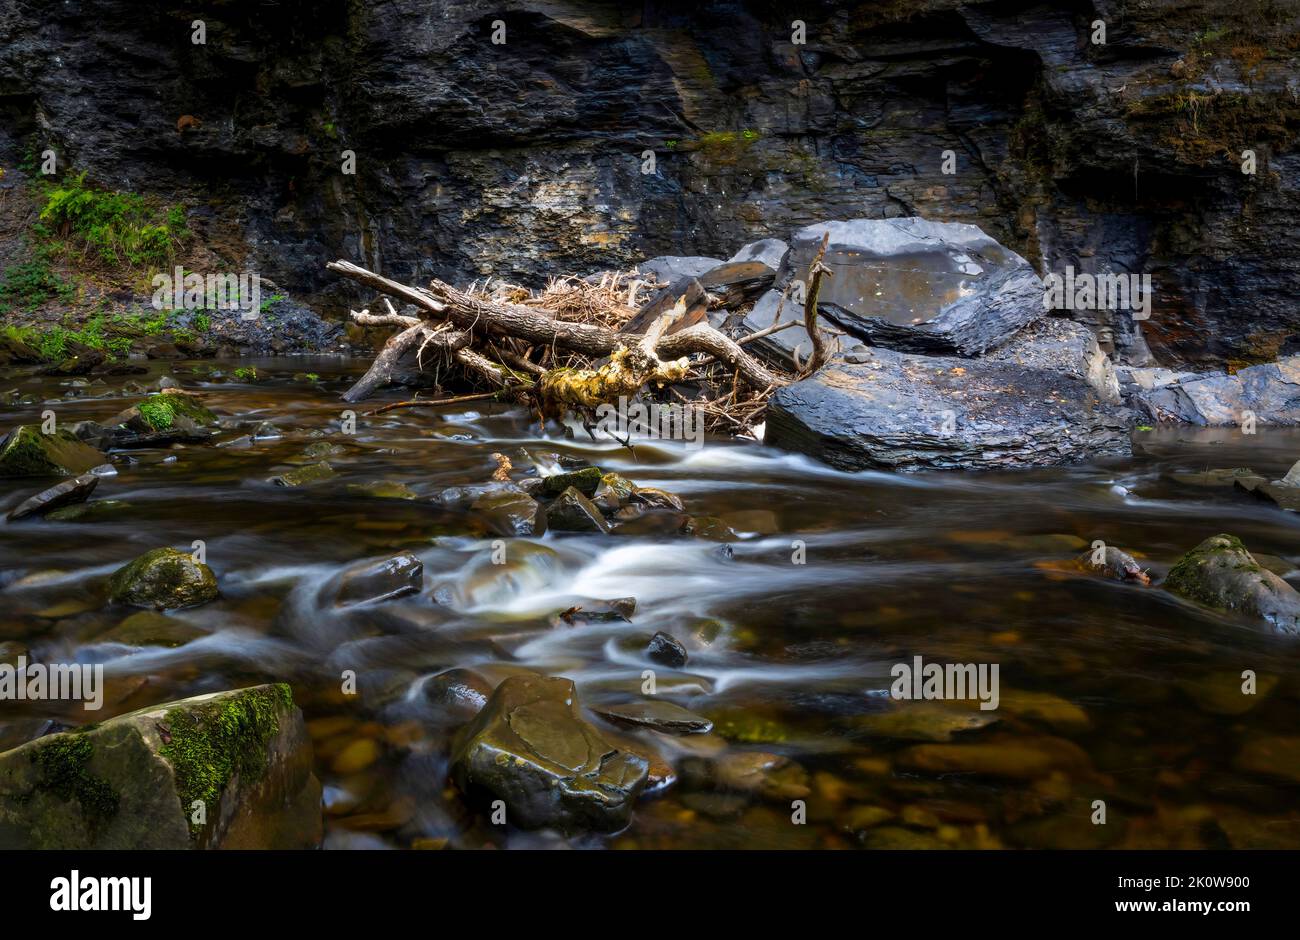 Tree branches washed down a river in South Wales adding to nature's textures. Stock Photo